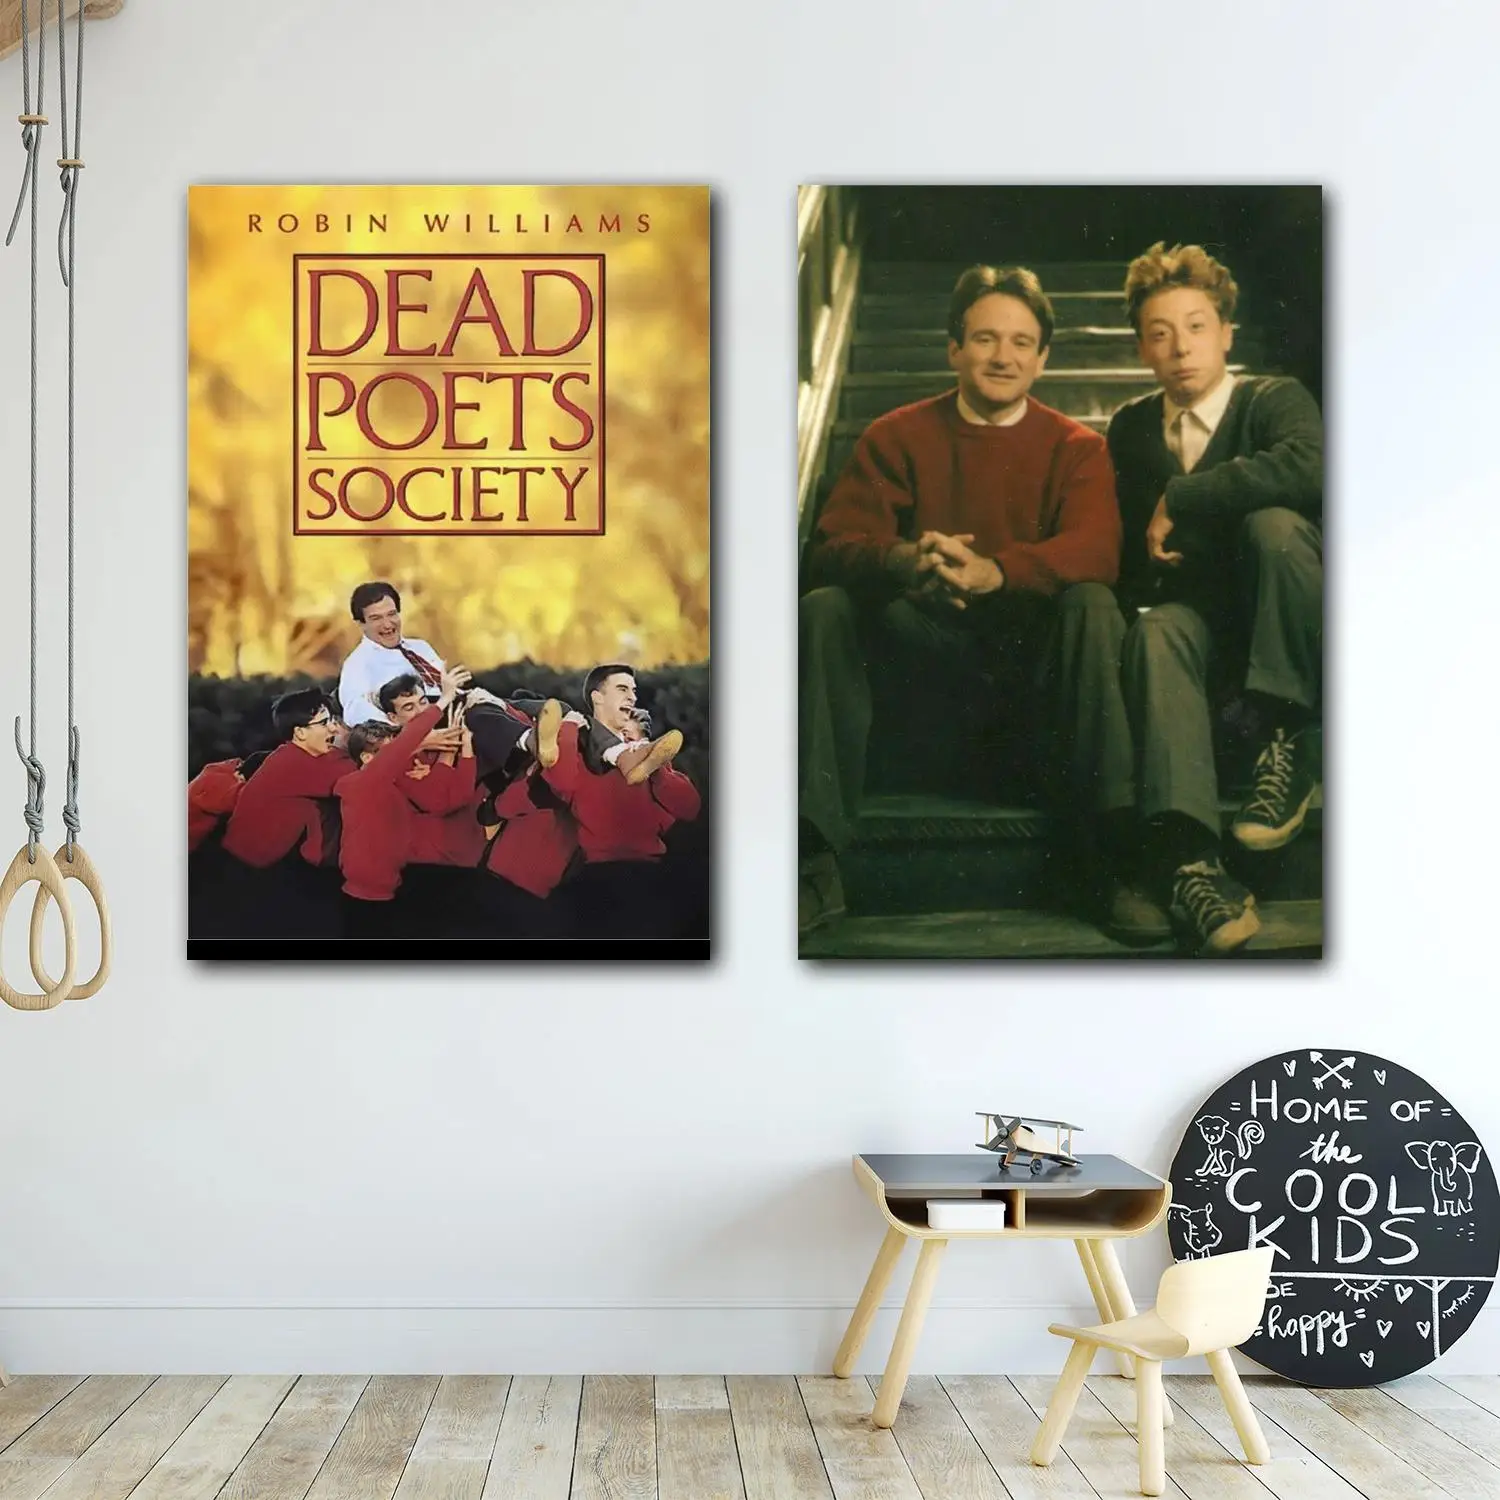 

dead poets society poster Decorative Canvas 24x36 Posters Room Bar Cafe Decor Gift Print Art Wall Paintings